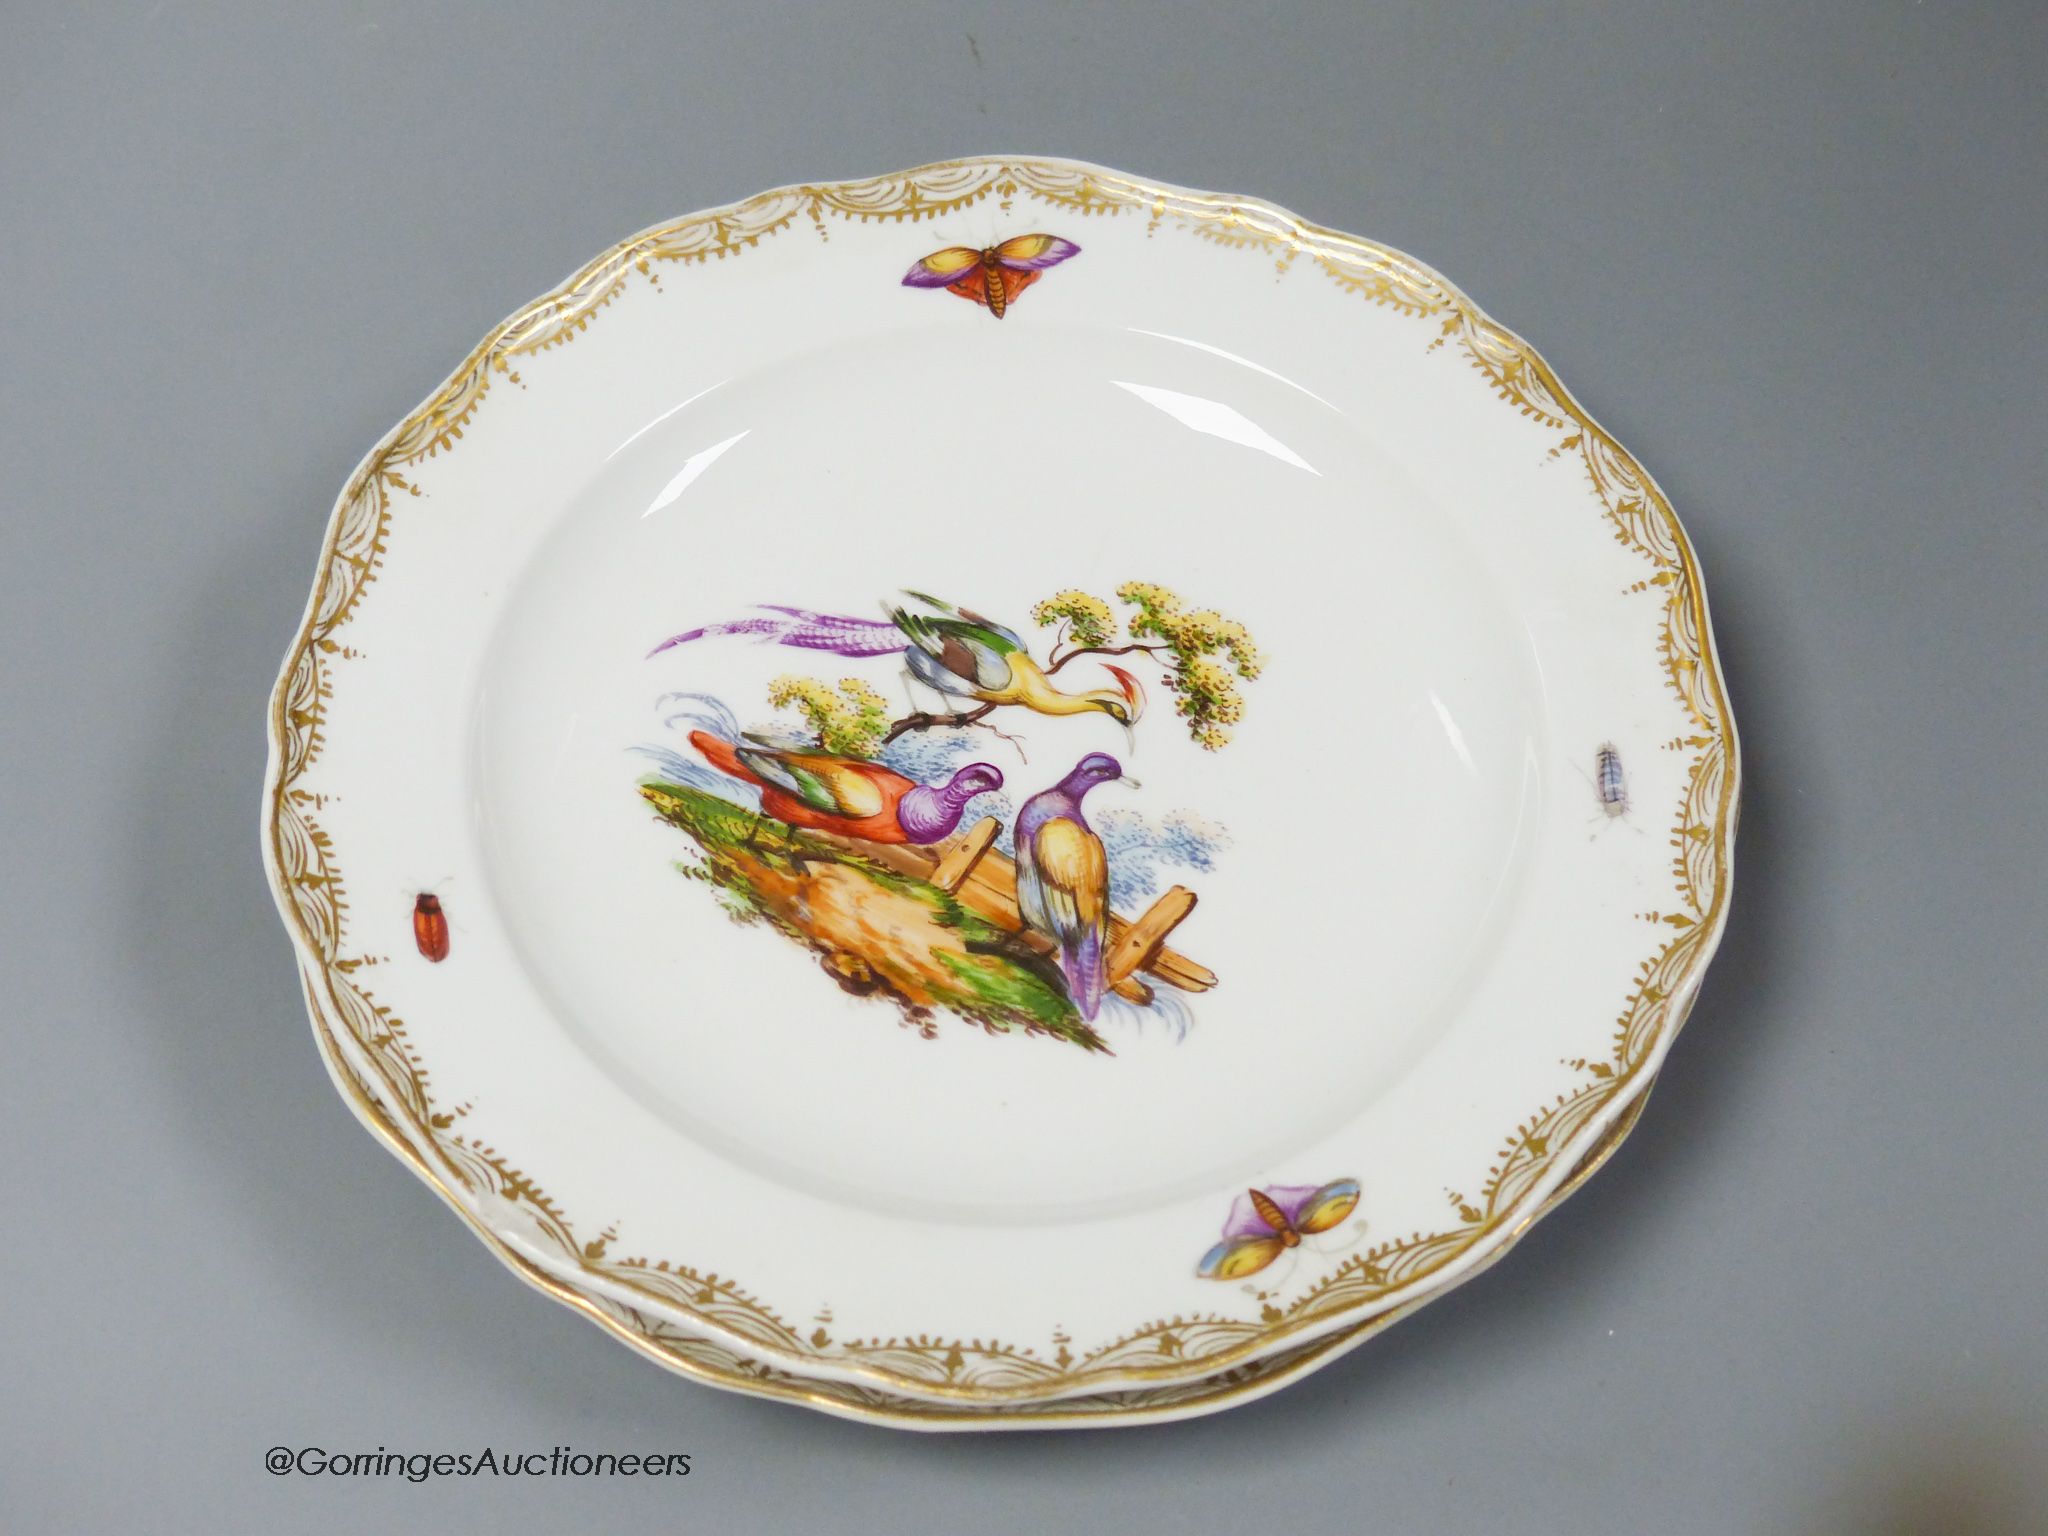 A set of six Meissen dessert dishes, painted with birds,factory seconds, 25.5cm diameter - Image 5 of 8